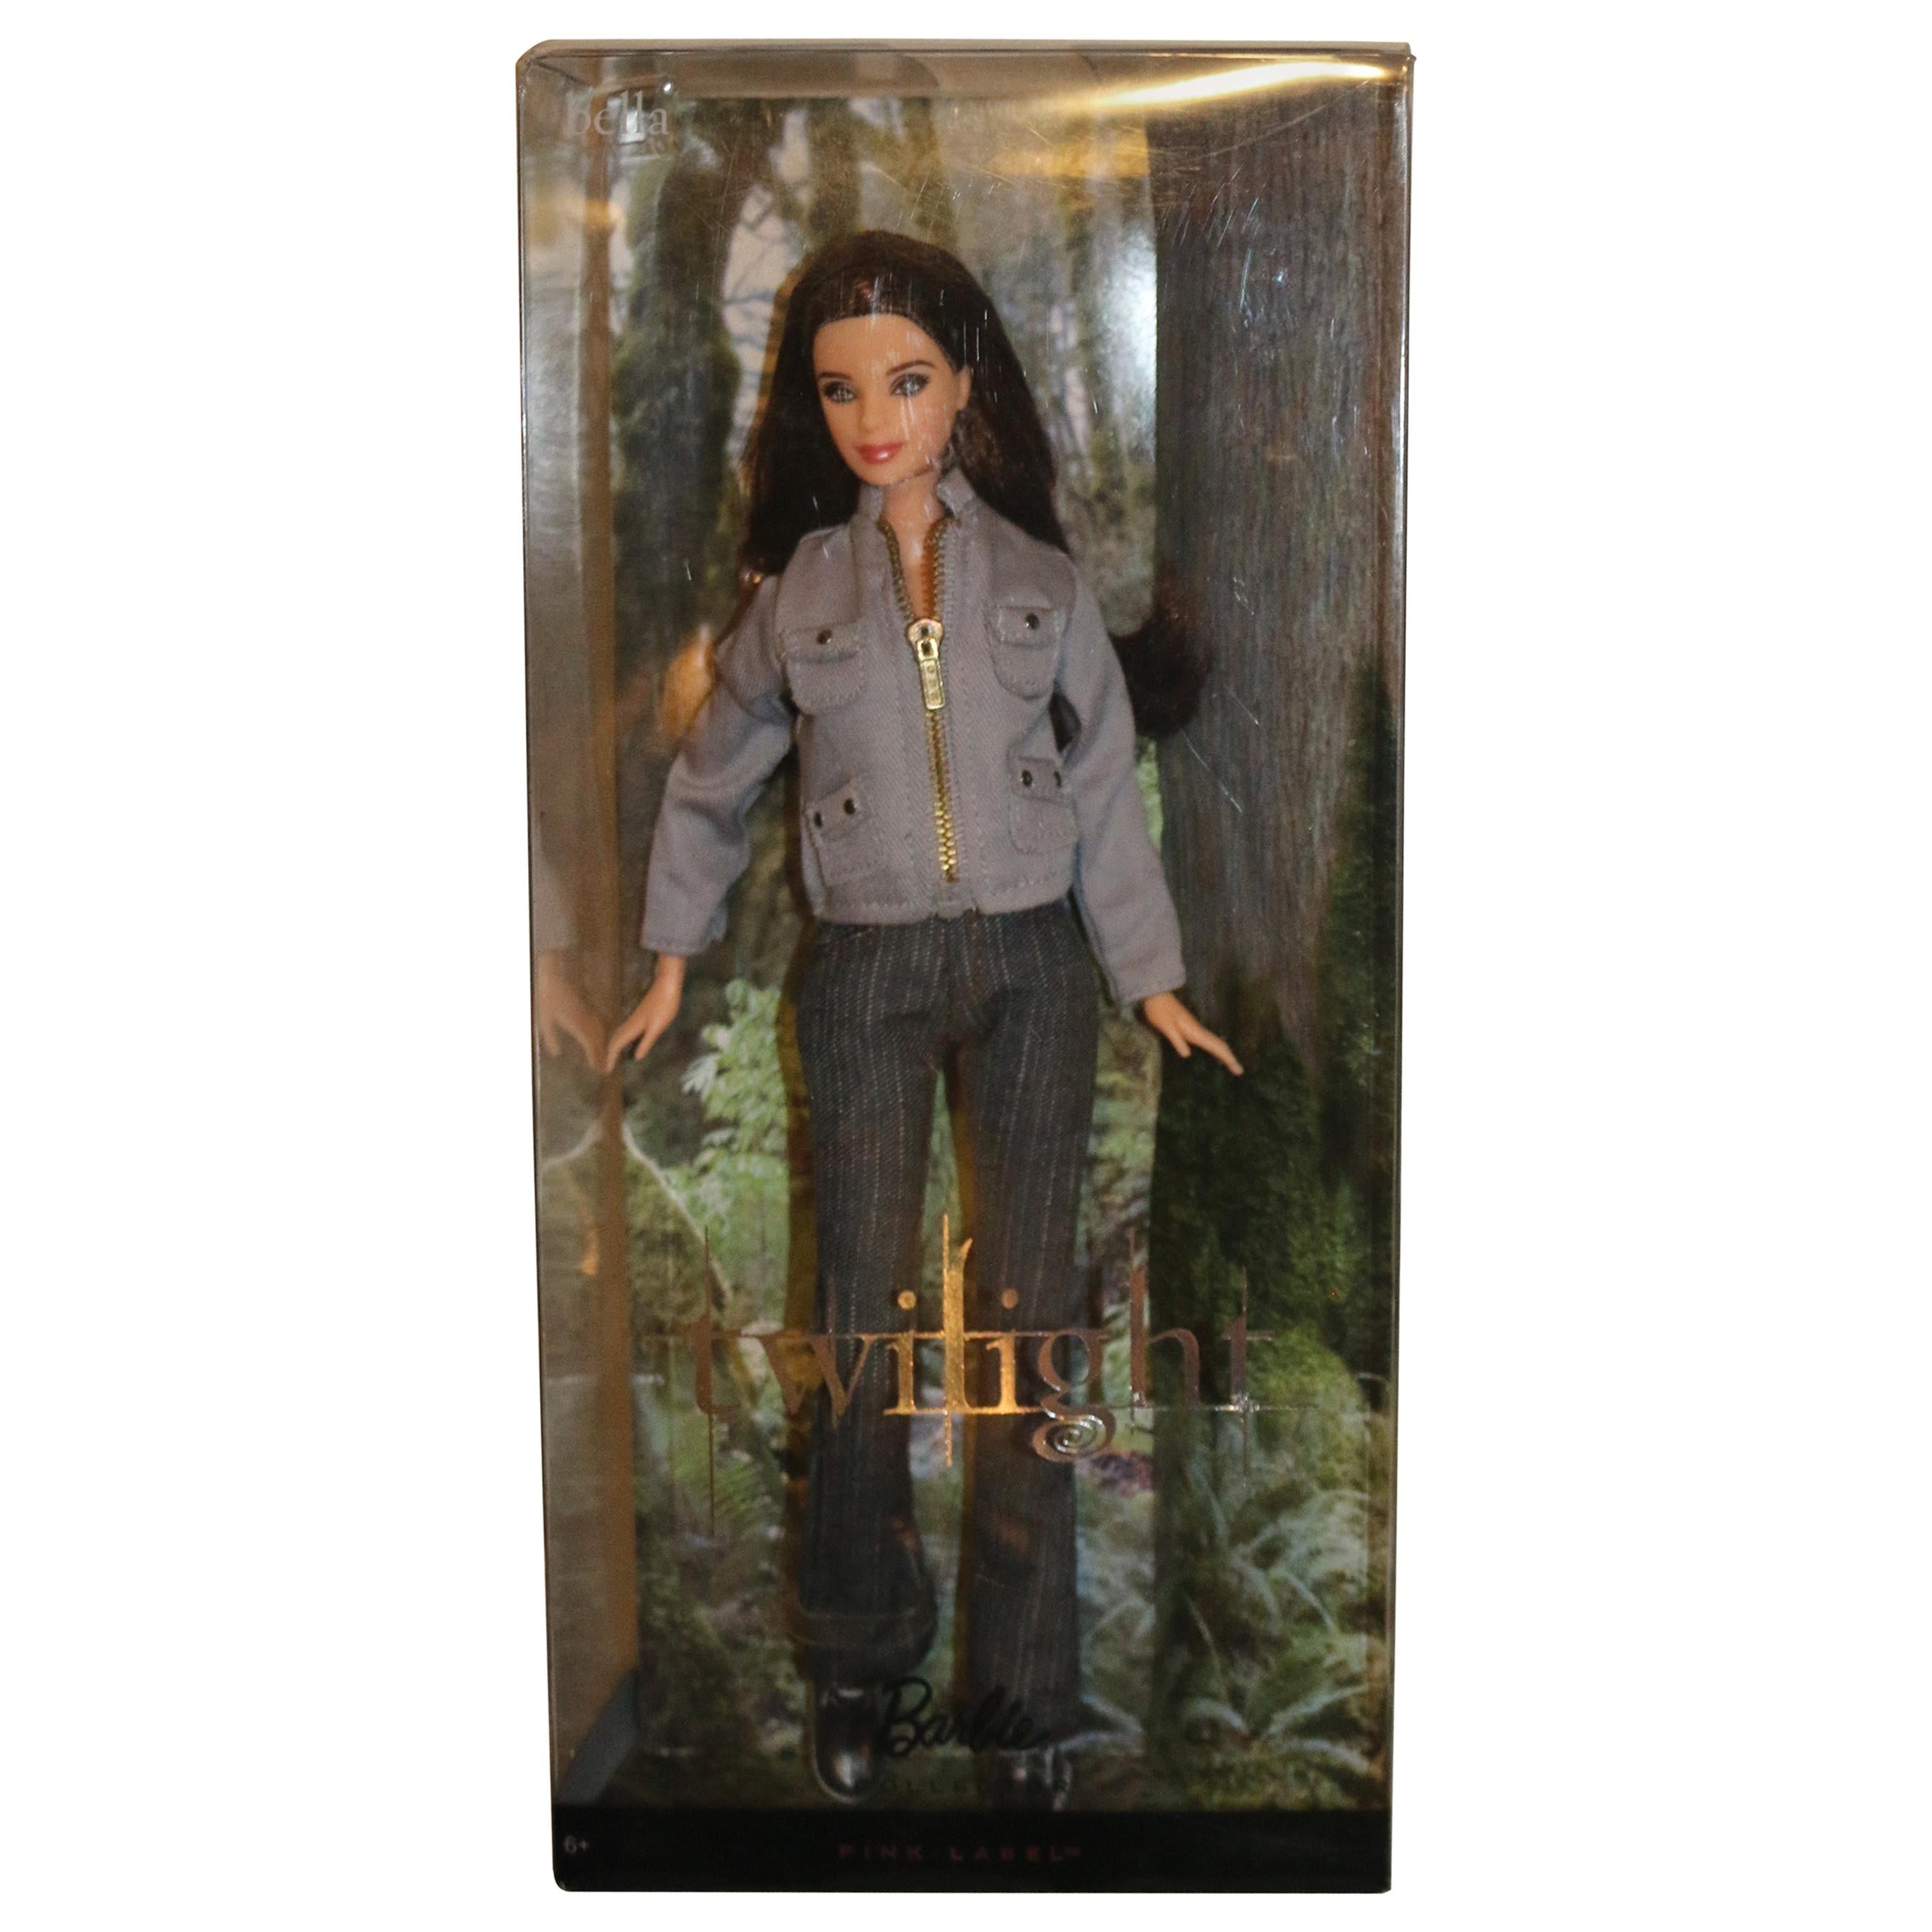 Twilight Saga Barbie Collection Bella Doll Pink Label New in Sealed Box  Package For Sale at 1stDibs | twilight saga barbie dolls, twilight barbie  dolls, how much are twilight barbies worth